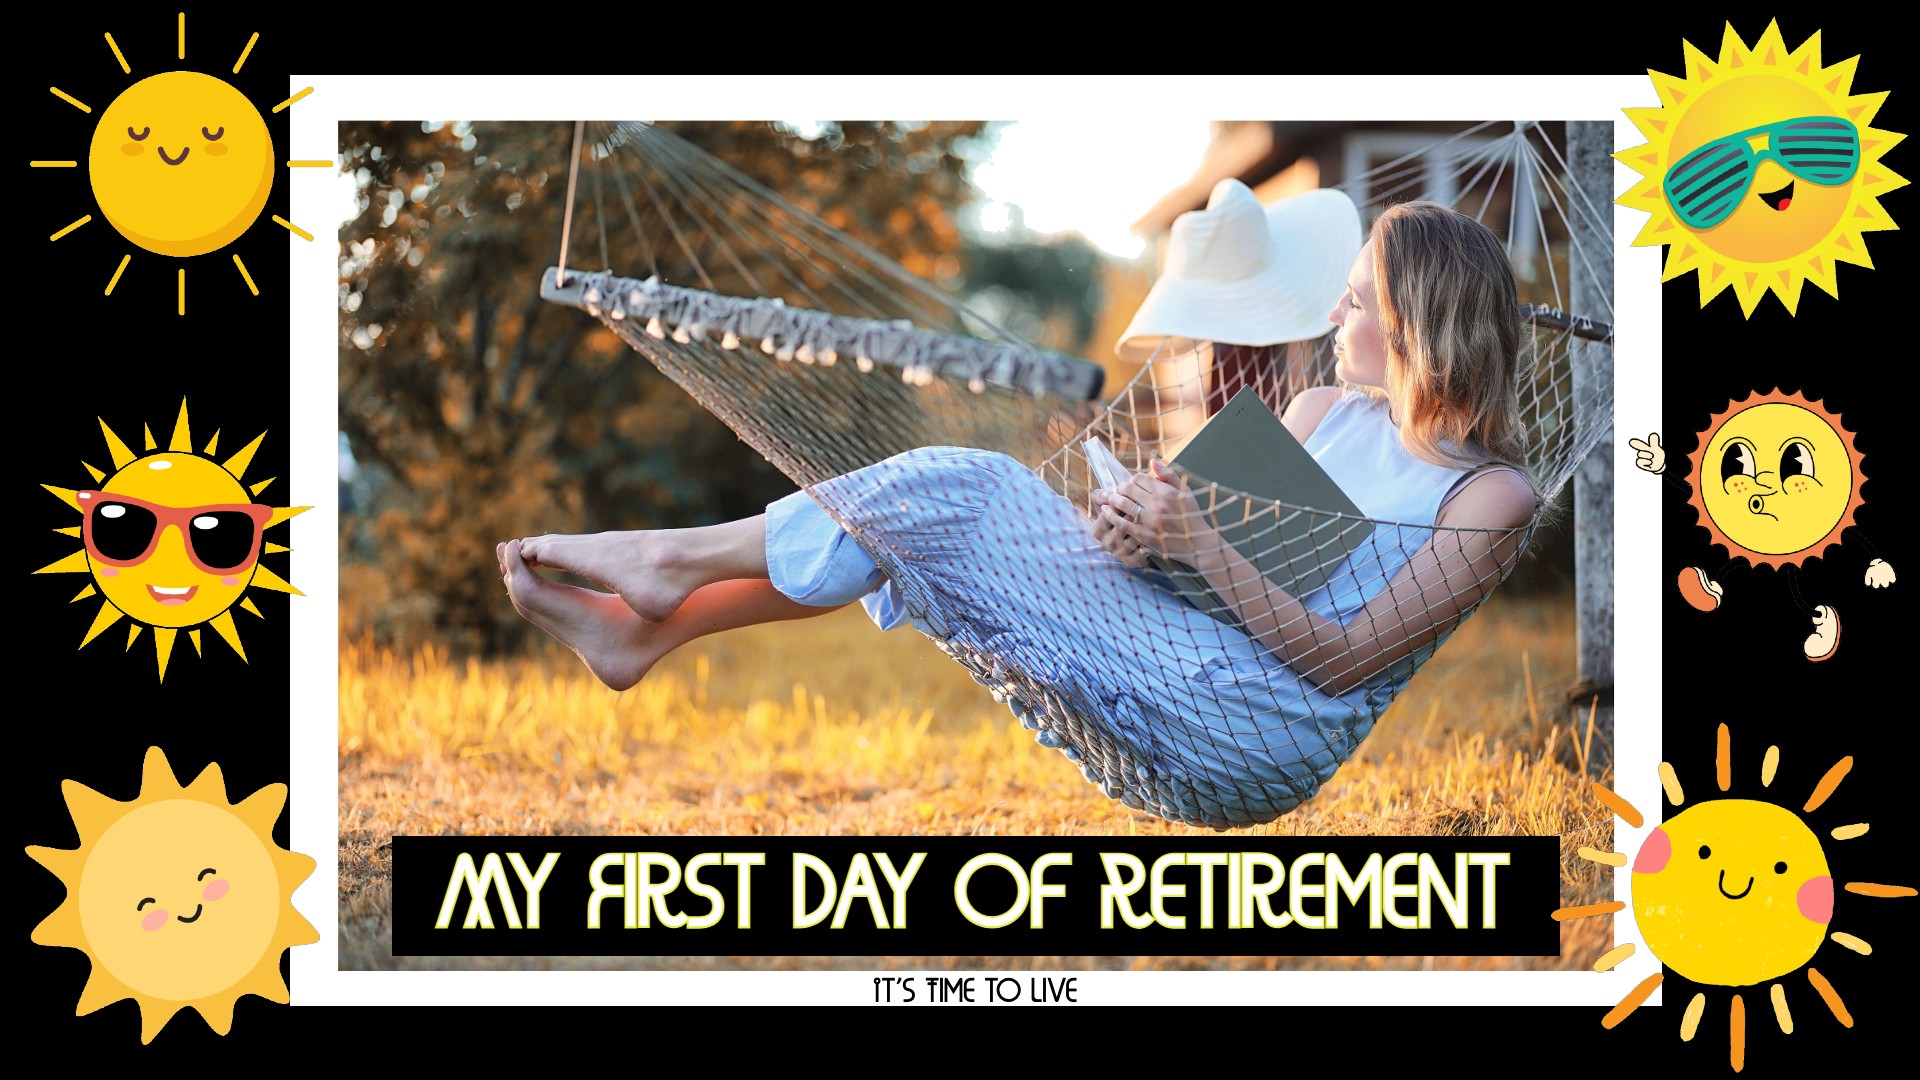 My First Day of Retirement: It’s Time to Live